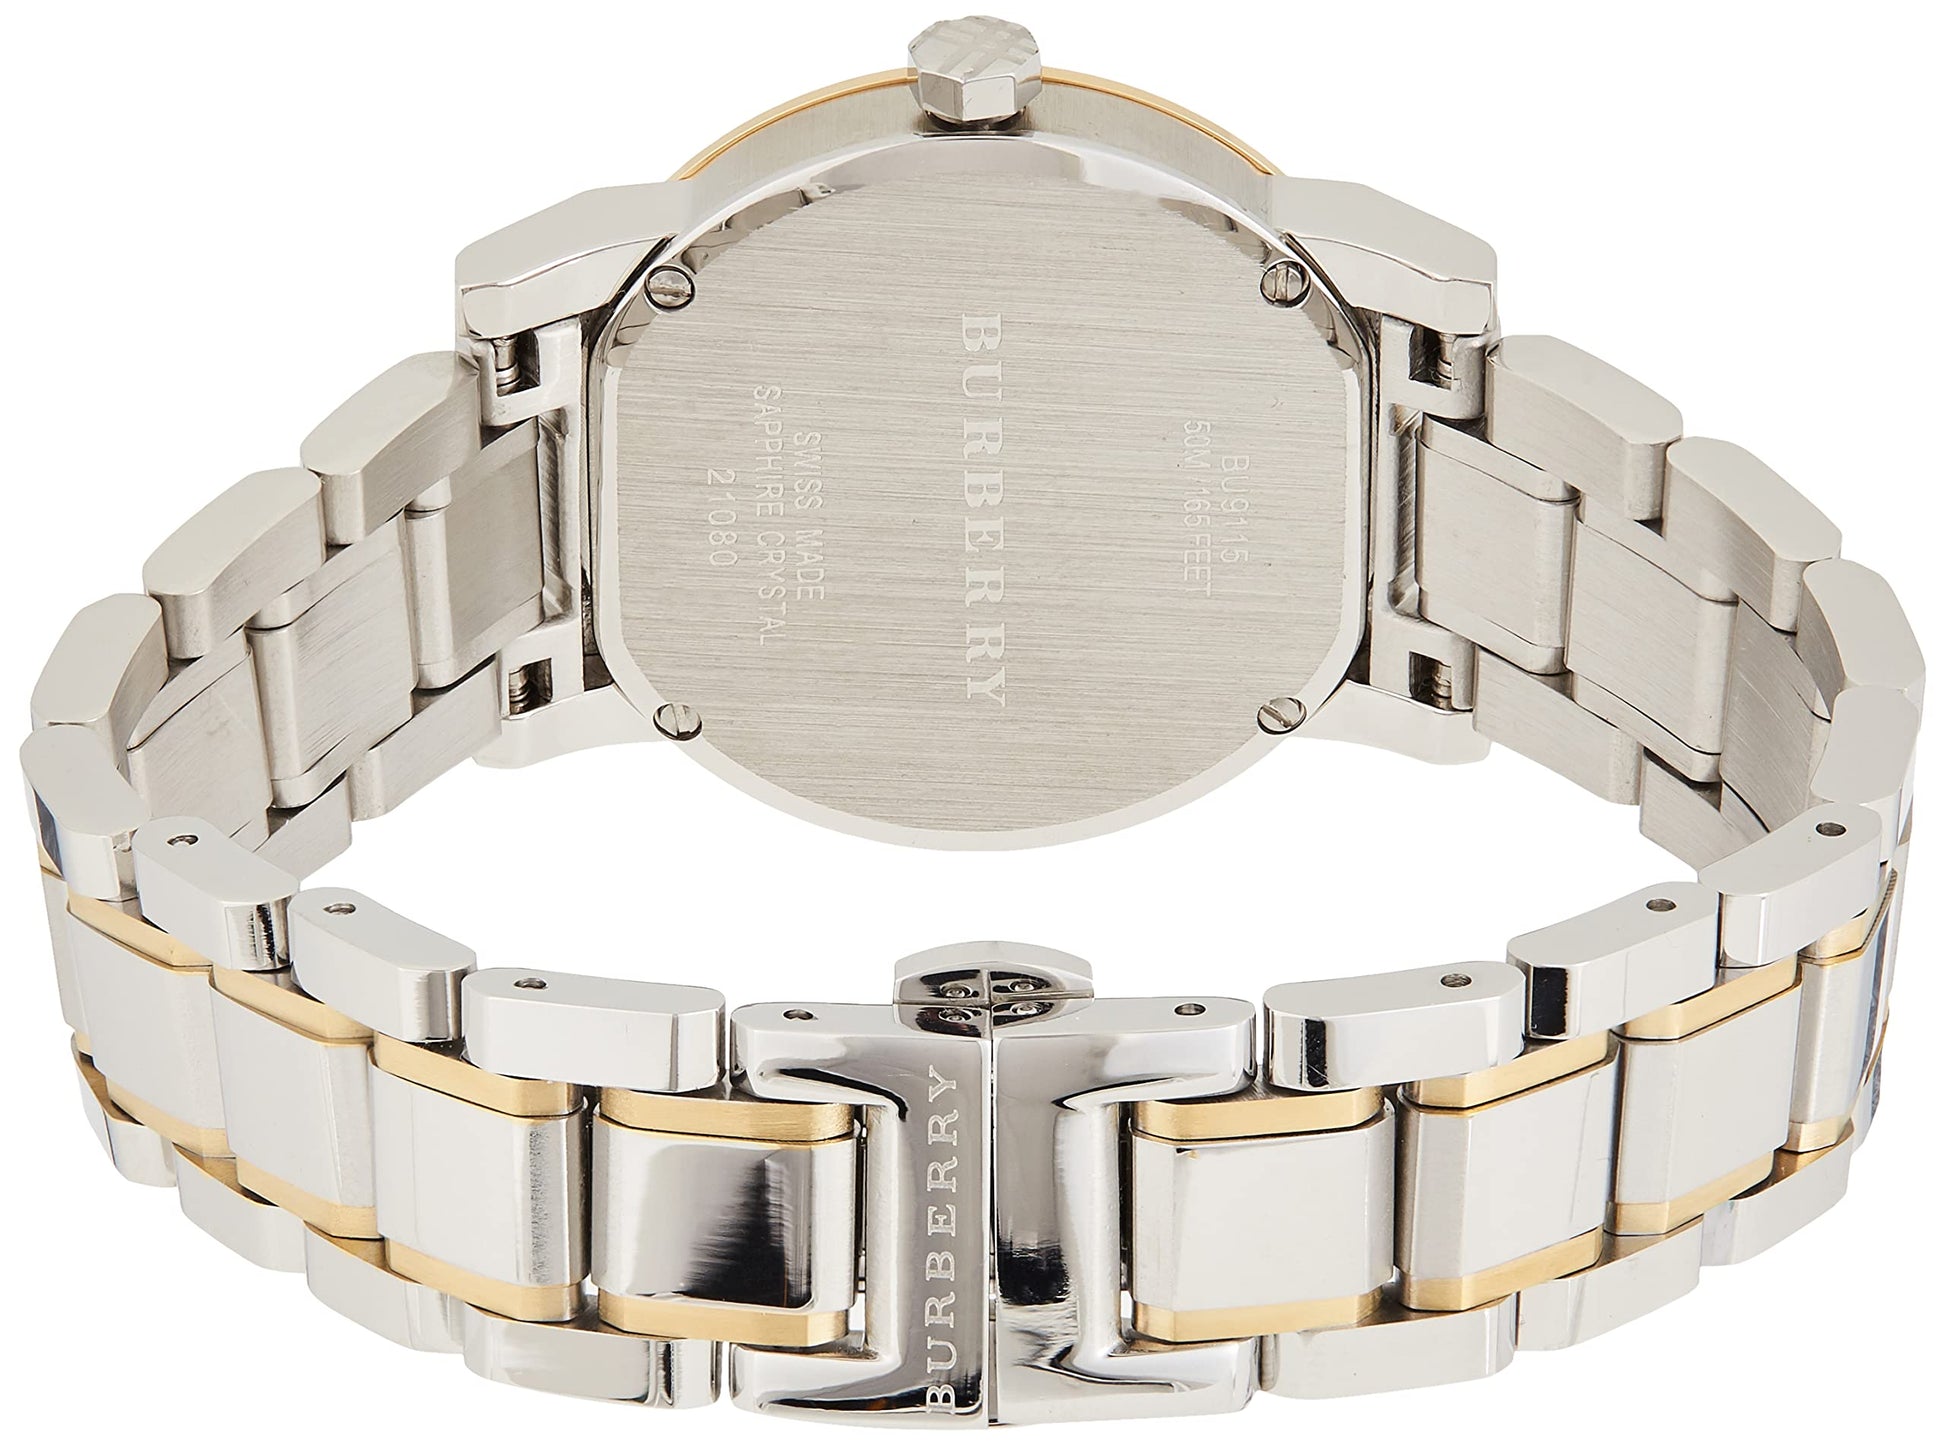 Burberry The City White Dial Two Tone Steel Strap Watch for Women - BU9115